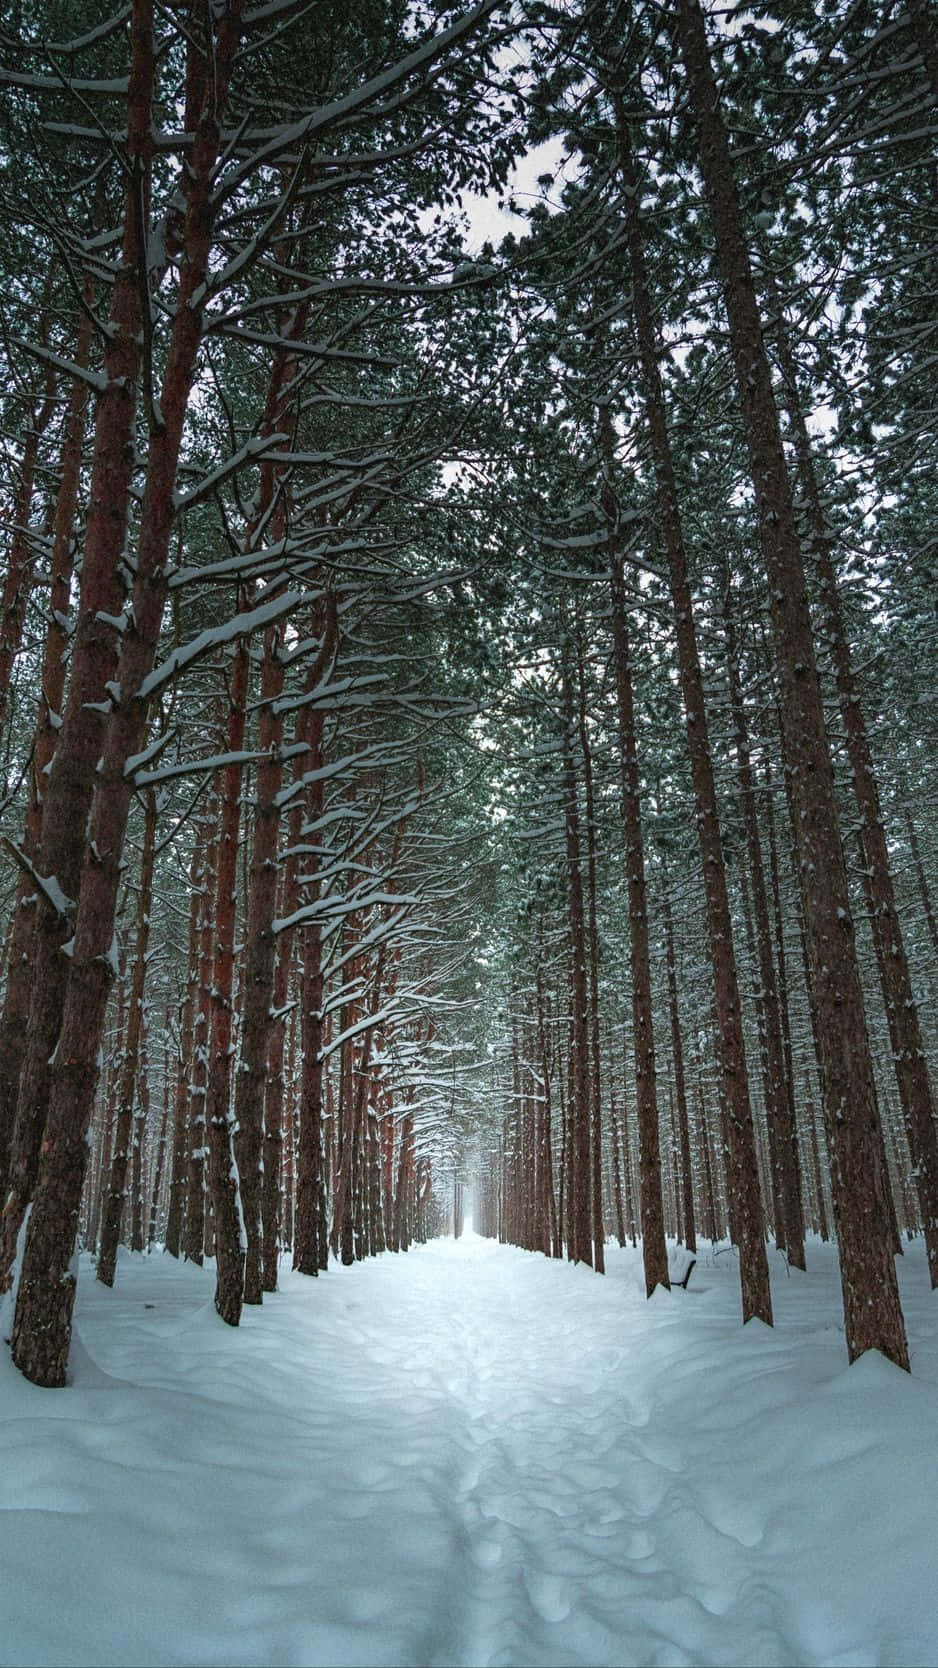 A peaceful Winter day in the Snowy Forest